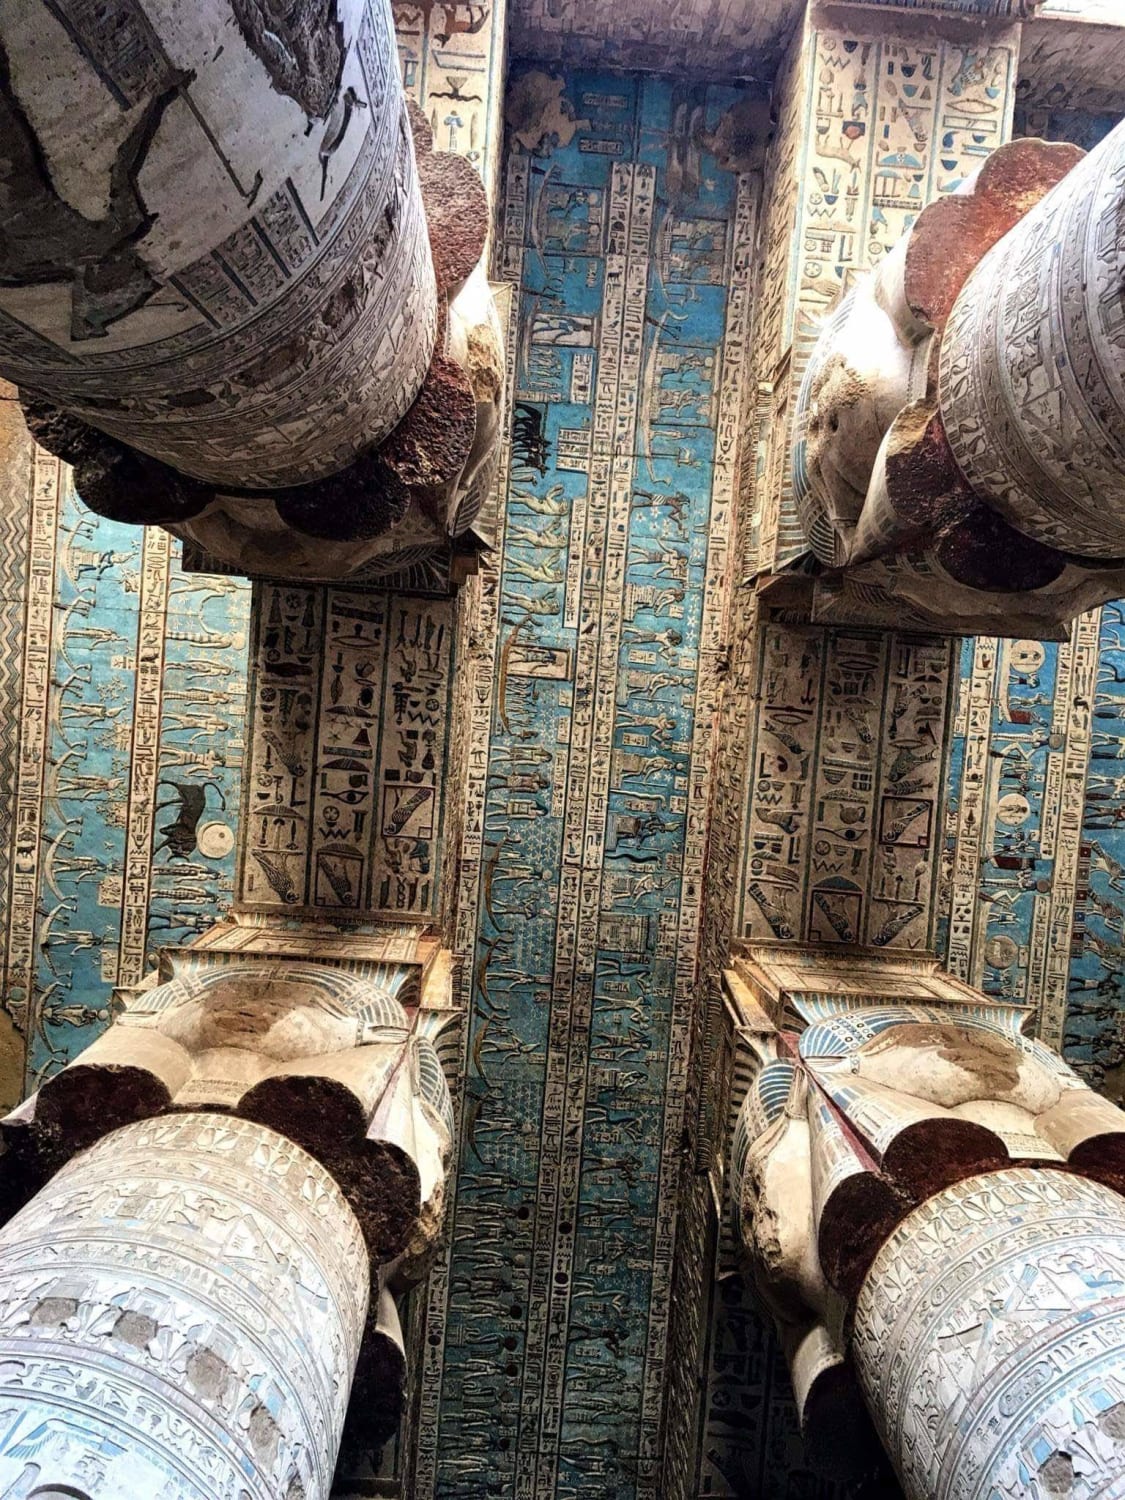 The ceiling of the 2000 years old hypostyle hall of the temple of Hathor in Dendera, Egypt